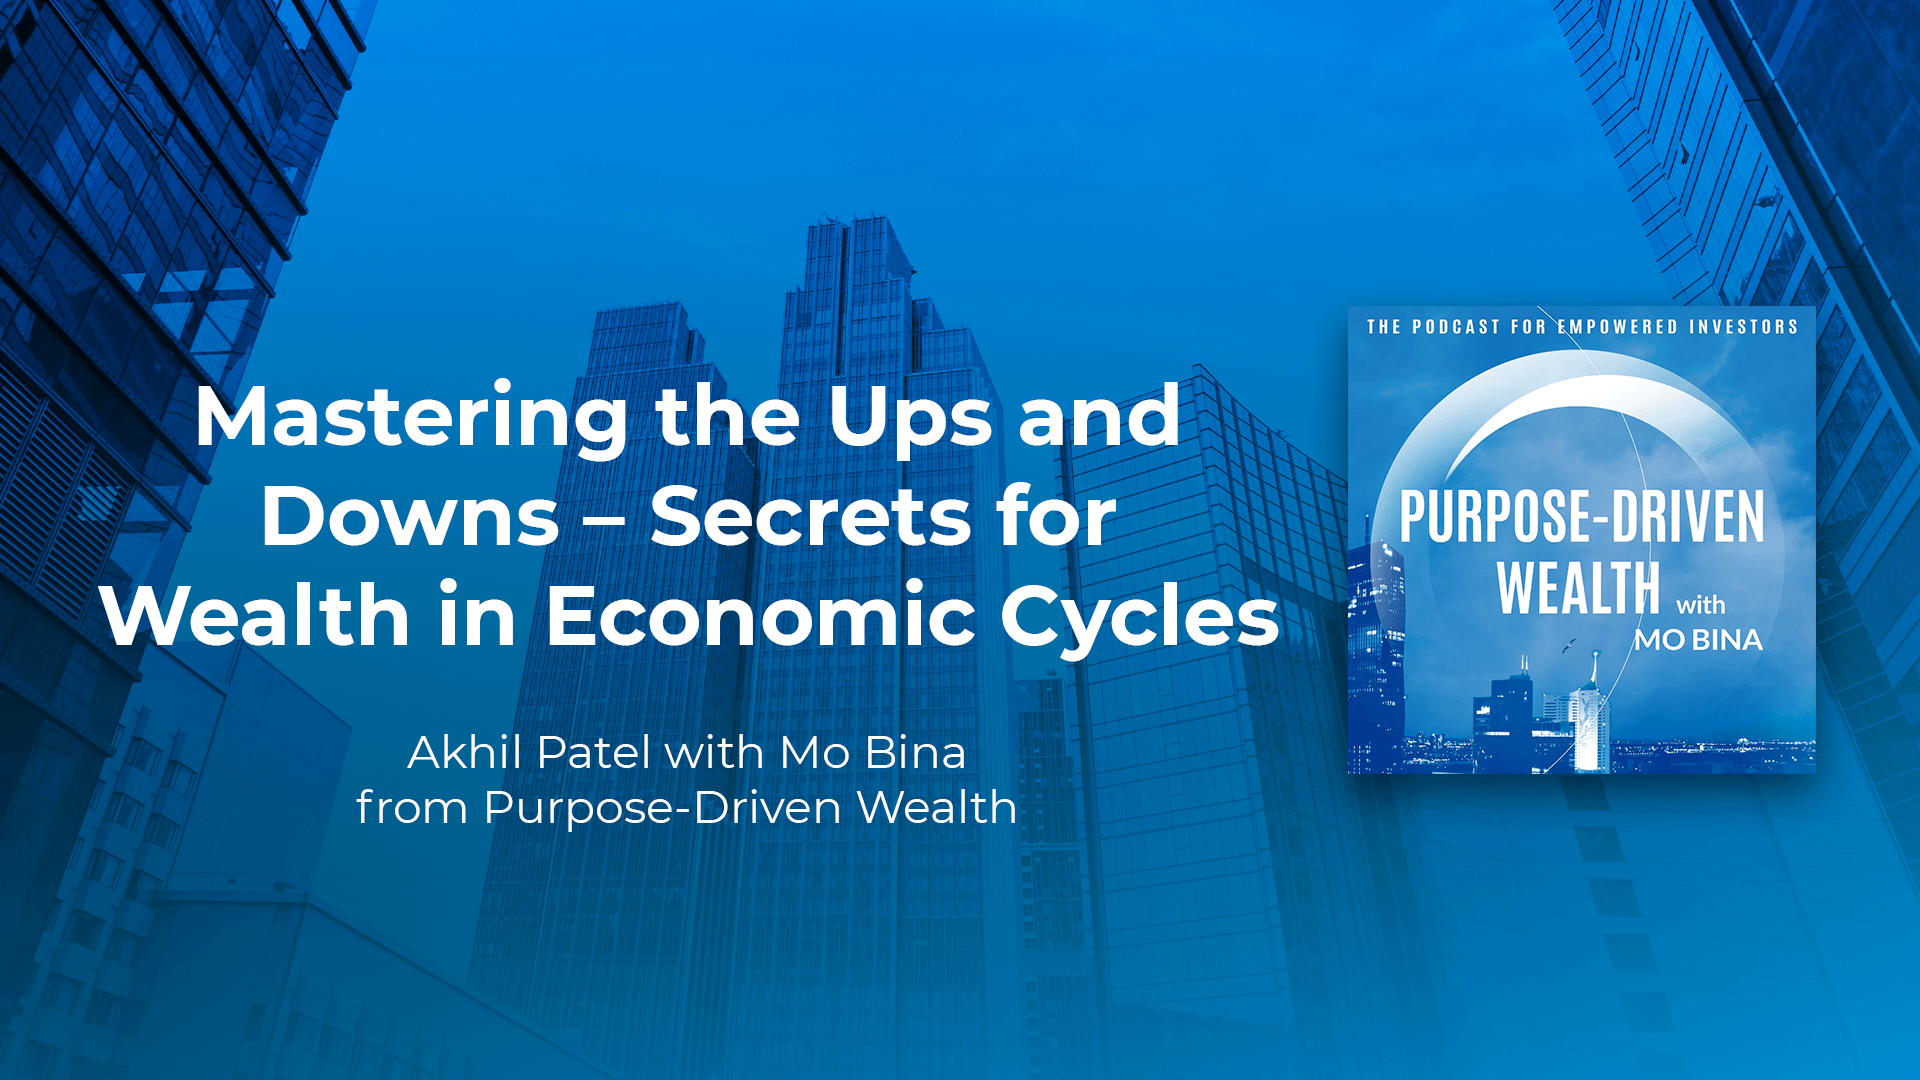 Mastering the Ups and Downs - Secrets for Wealth in Economic Cycles